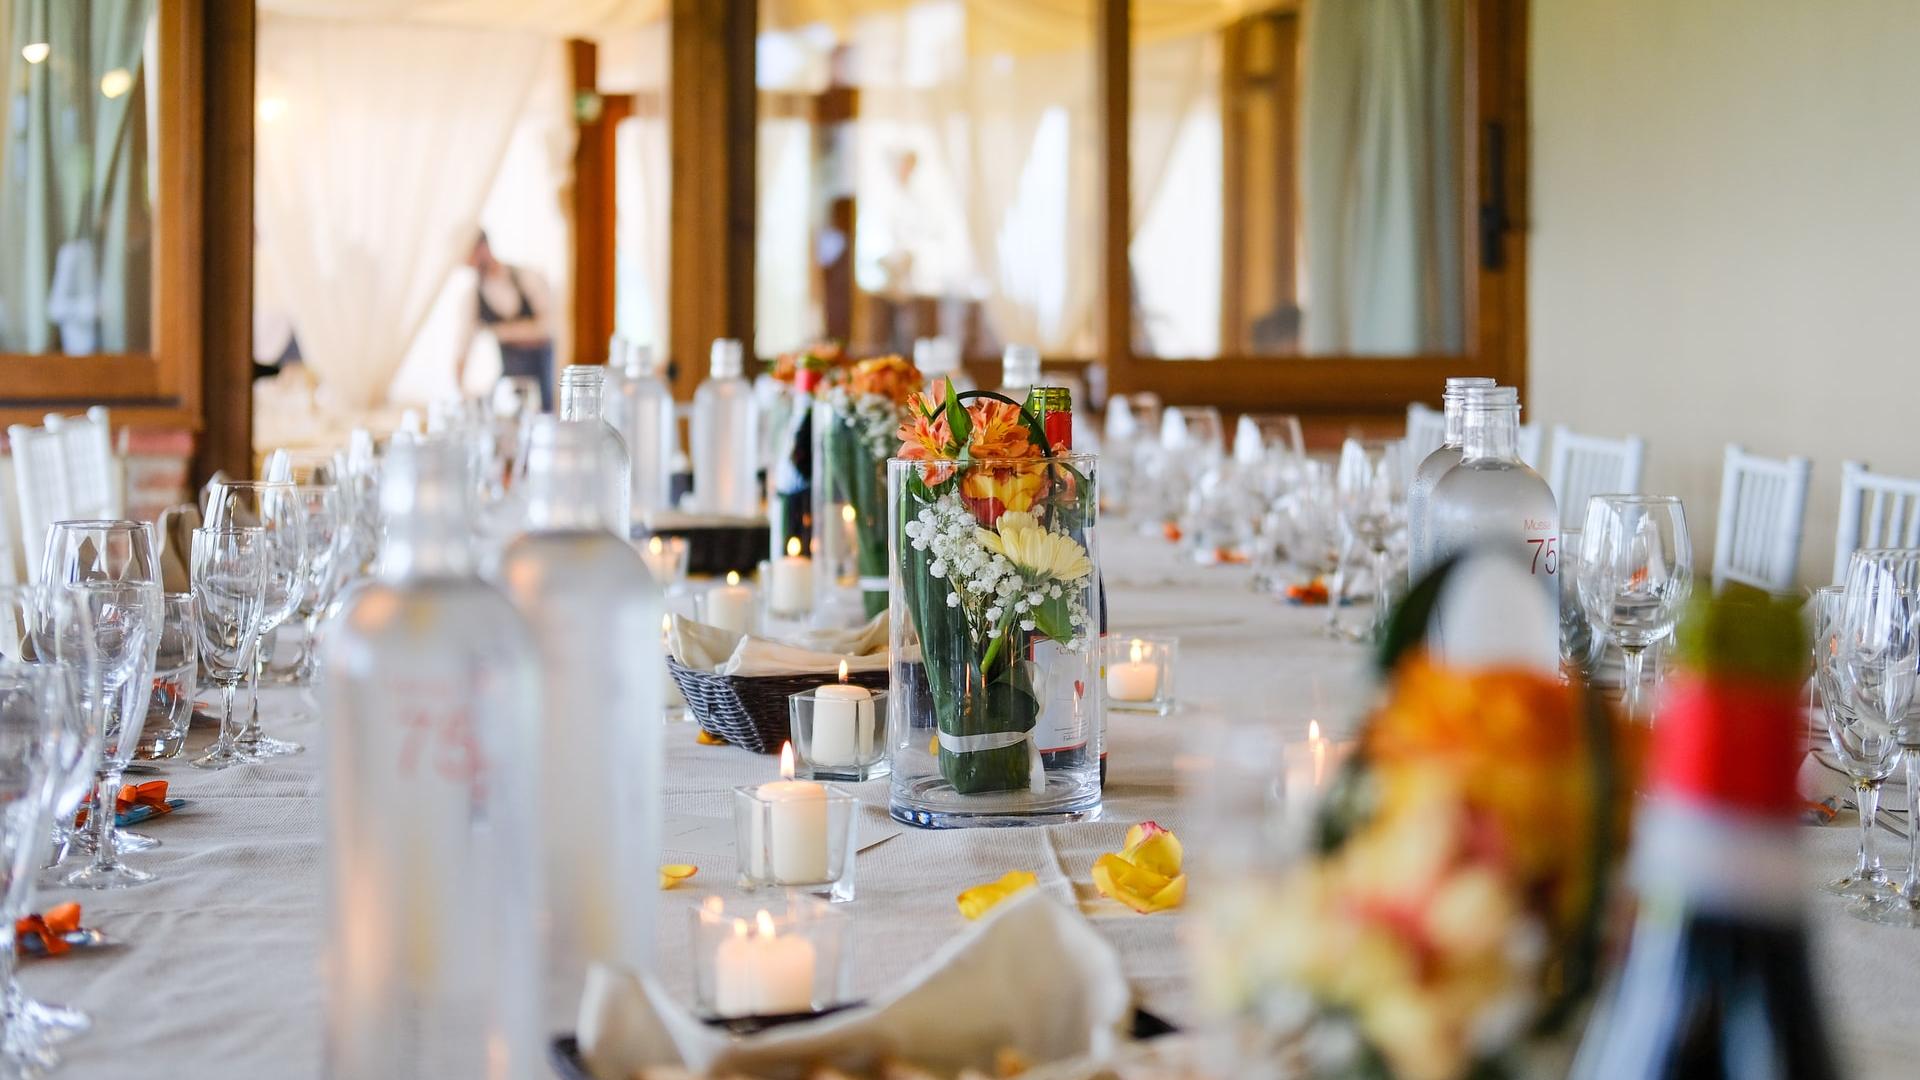 Wedding Venues for Hire in Yarra Valley